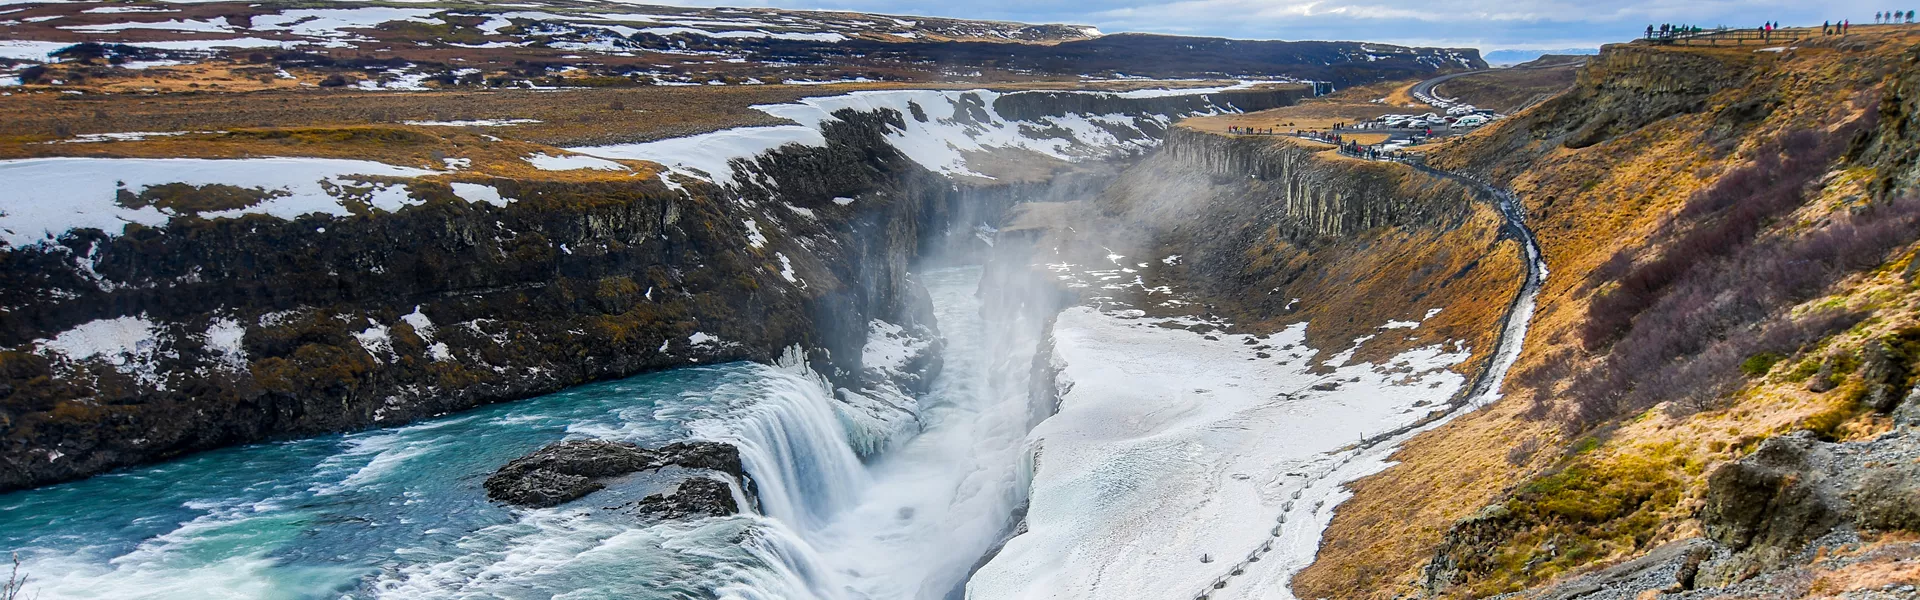 Iceland Guided Tours and Travel Guide